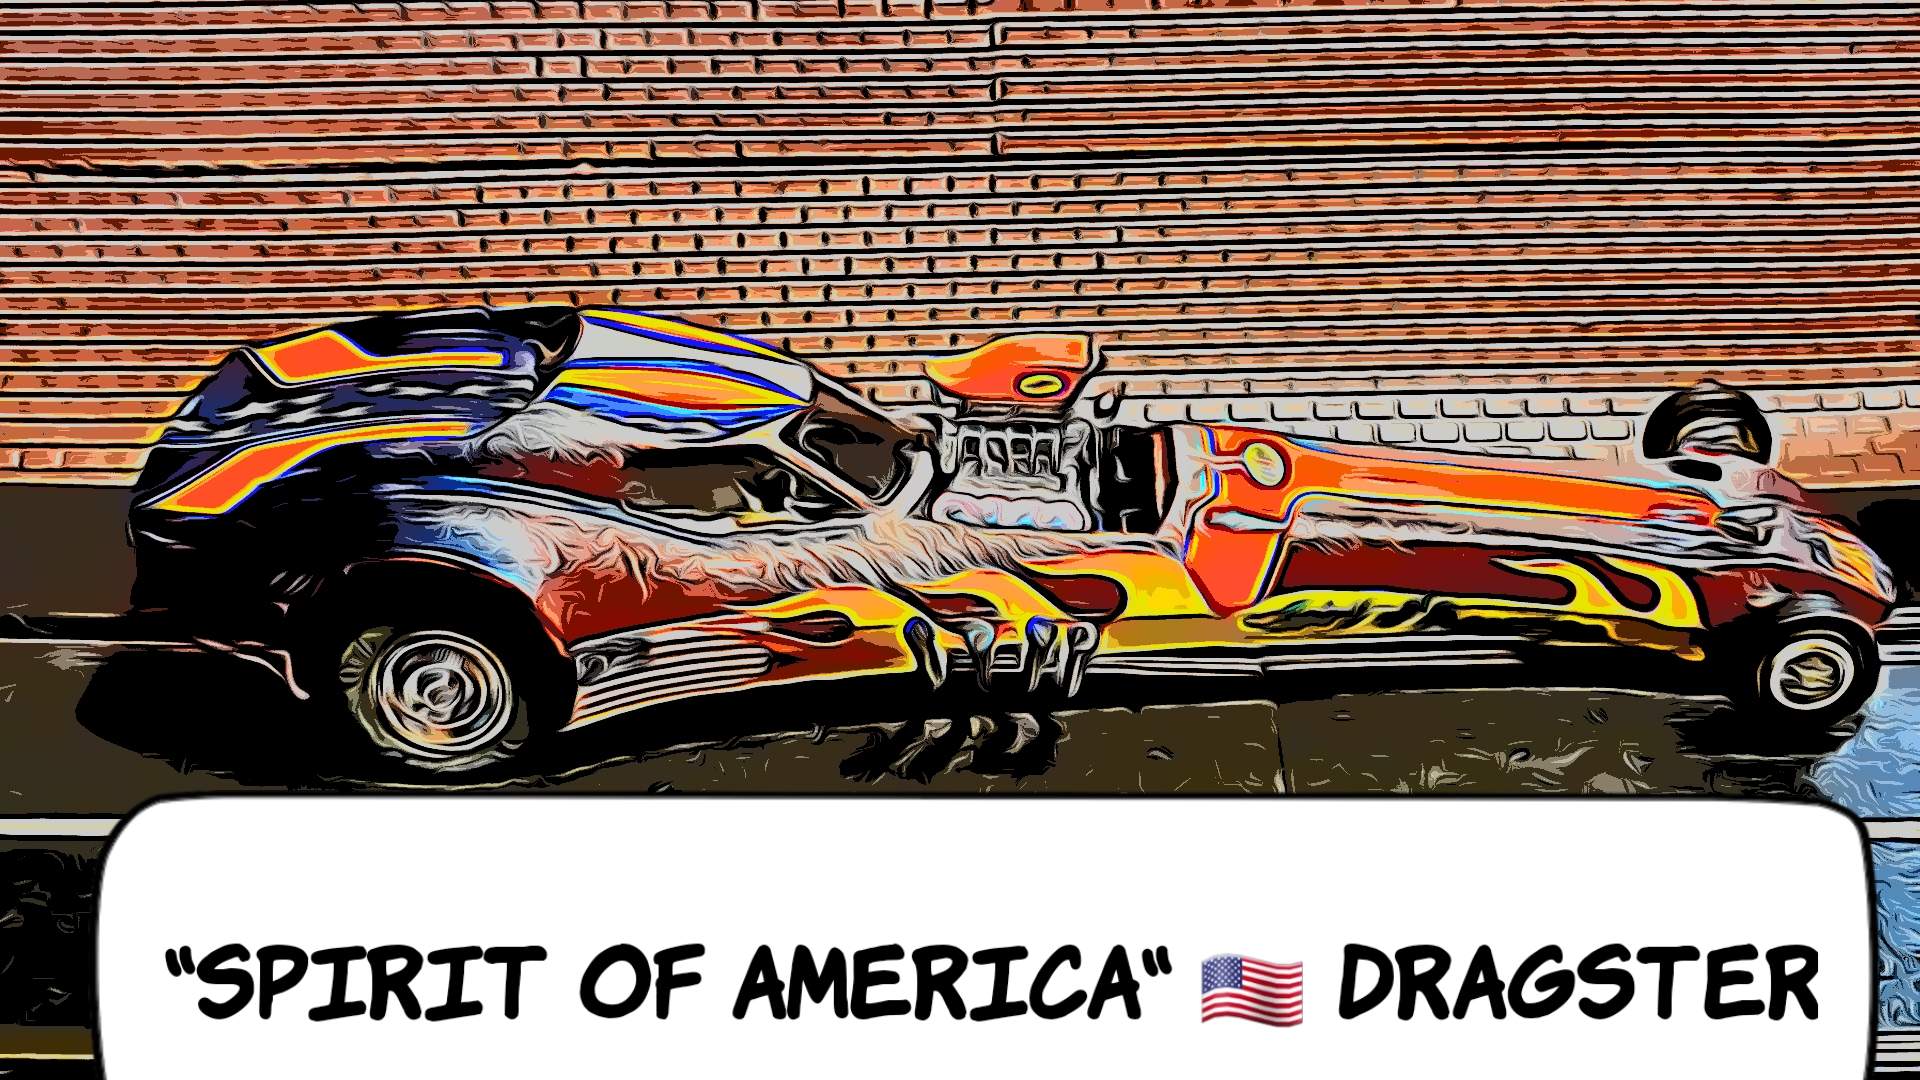 * SALE, Save $50 off our Ebay store price * AMT “Spirit of America” Dragster 1/24 Scale Slot Car